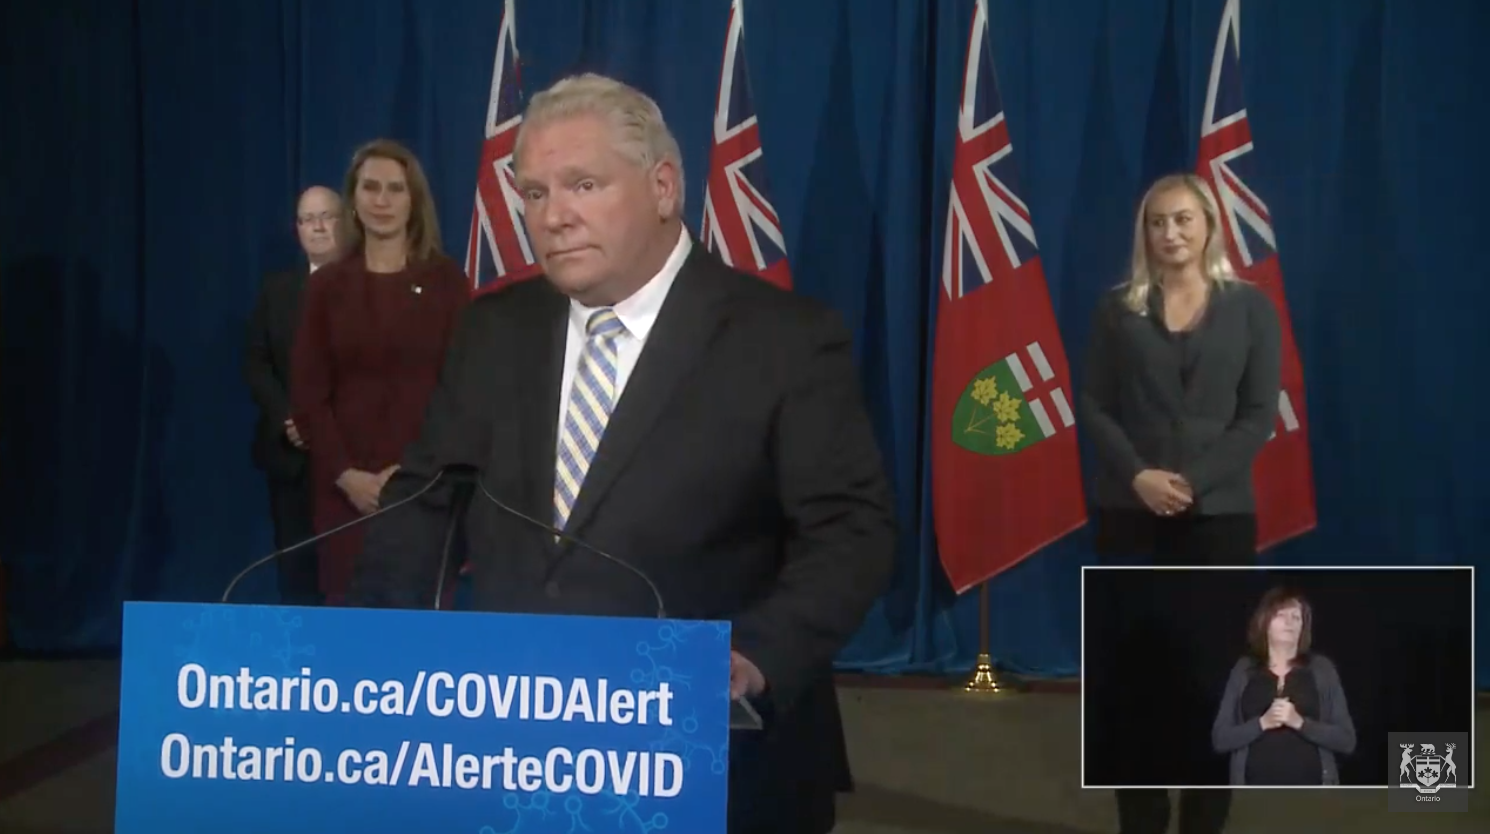 ‘I’ve just had it with these insurance companies’: Your Ontario COVID-19 roundup